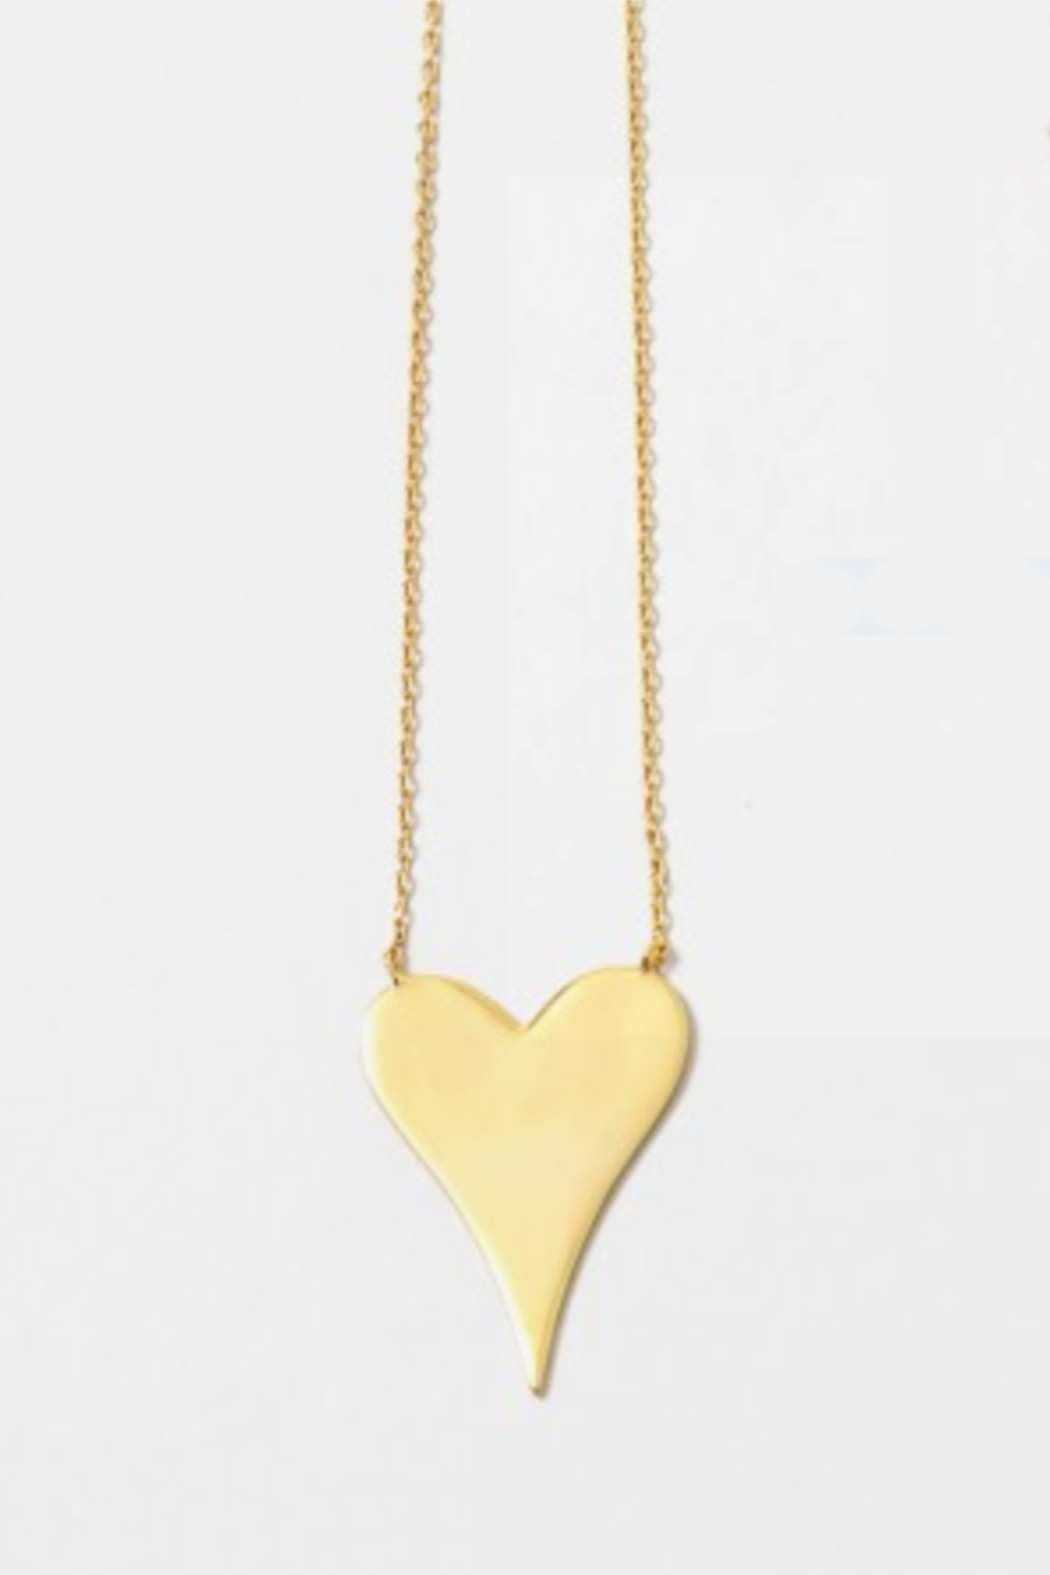 Sterling Silver Heart Necklace - Embellish Your Life 